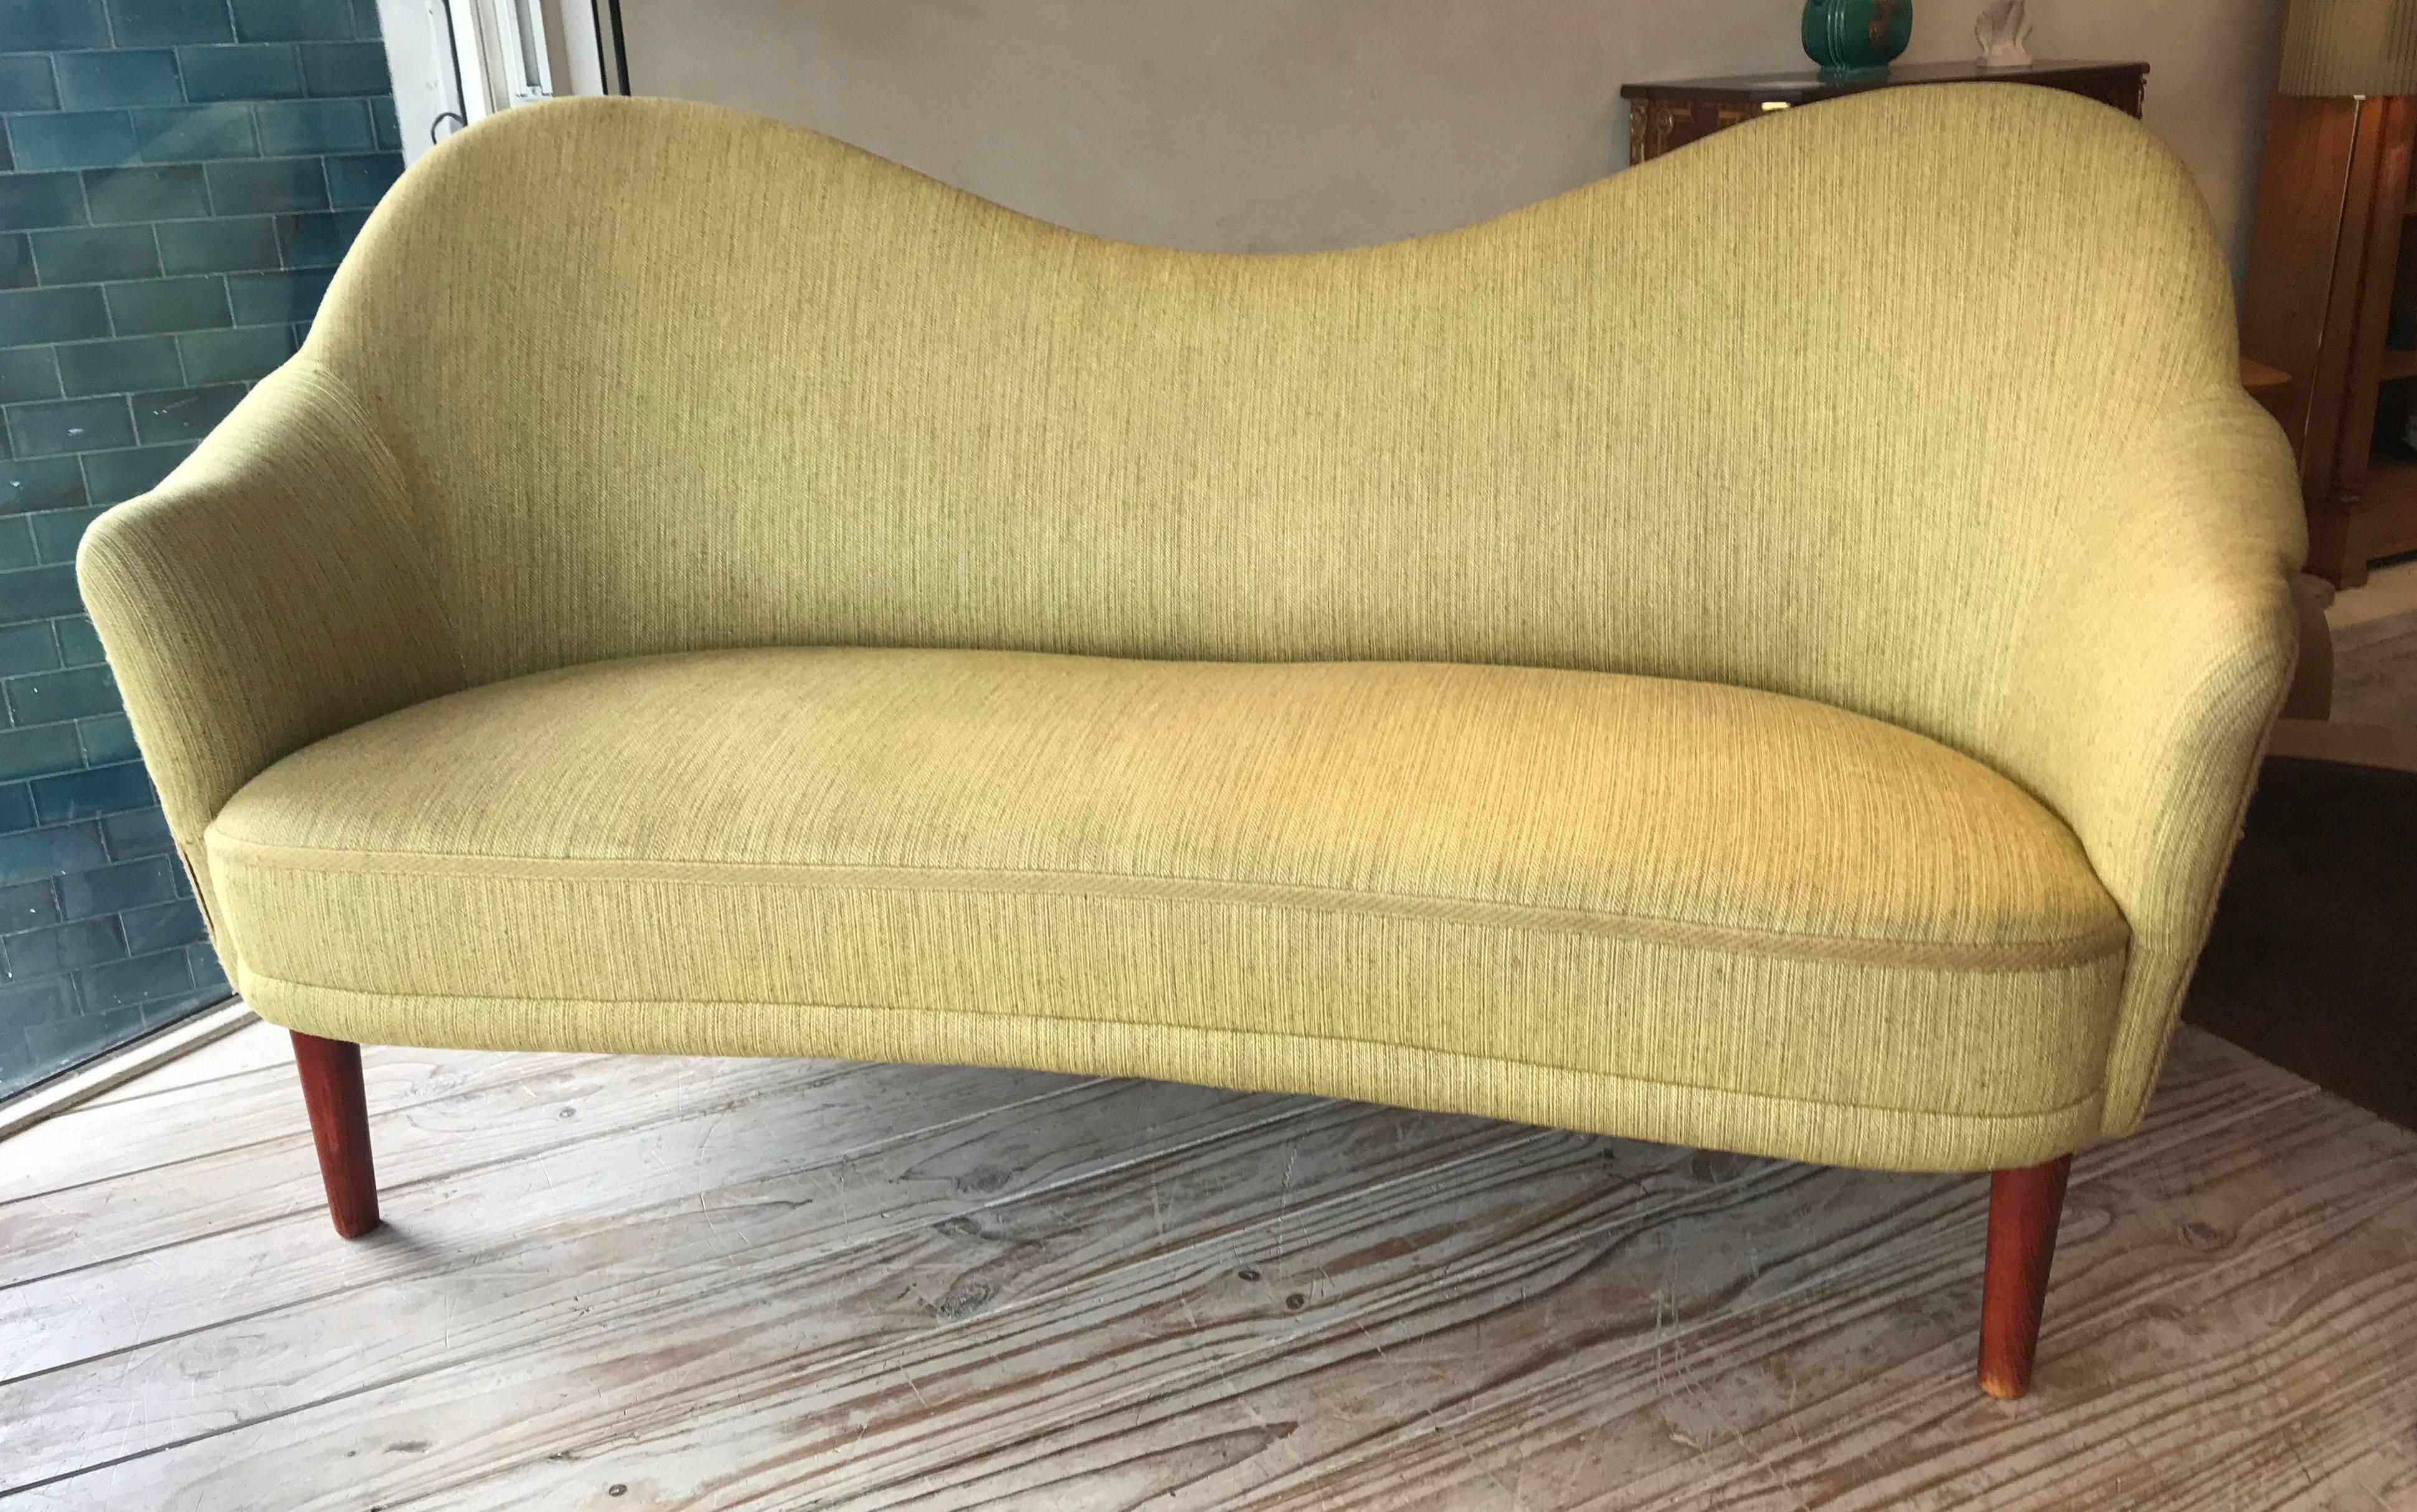 Samspel sofa by Carl Malmsten. This sofa has the original wool fabric. Sampsel is one of his most sought after designs.
The angle of the seating very cleverly engages conversation.